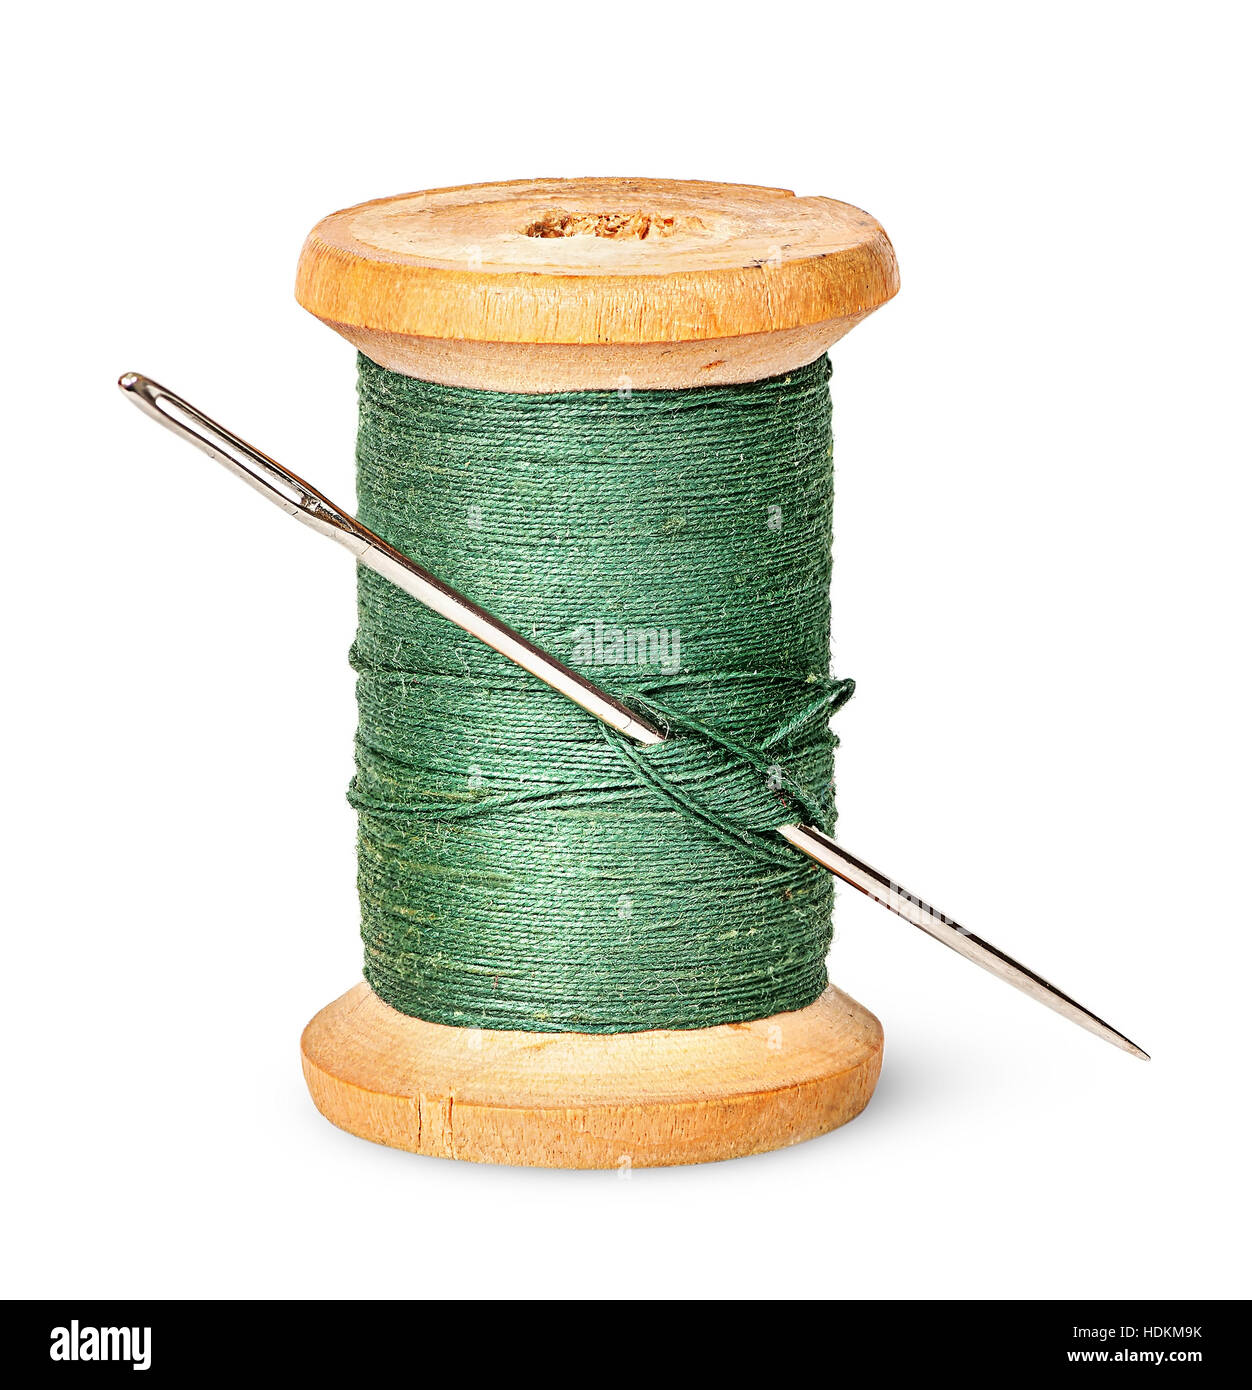 Needle and thread on wooden spool vertically isolated on white background Stock Photo